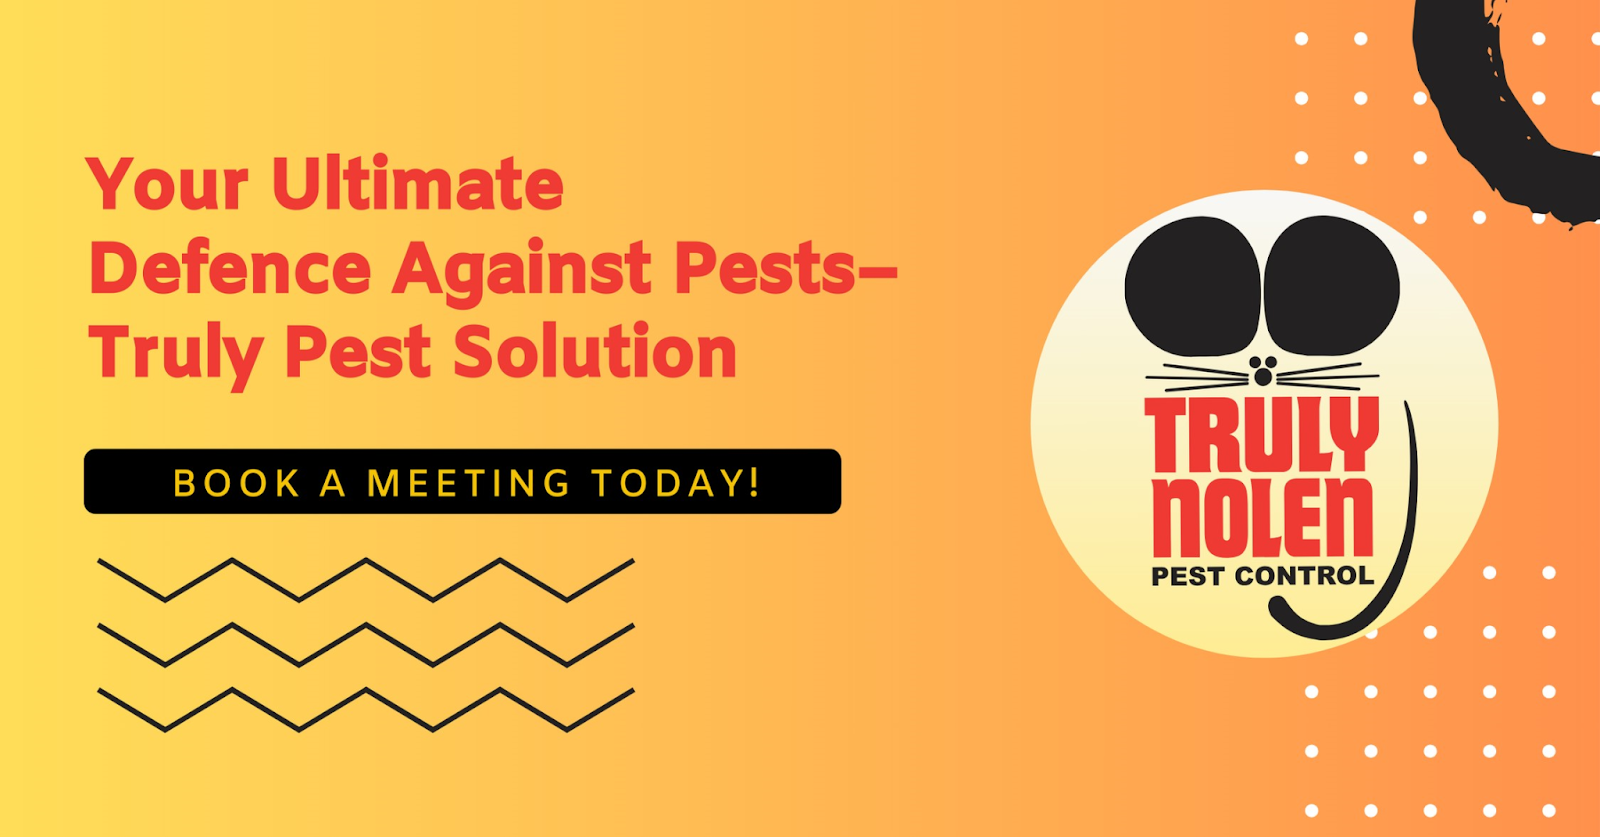 Your Ultimate Defence Against Pests – Truly Pest Solution